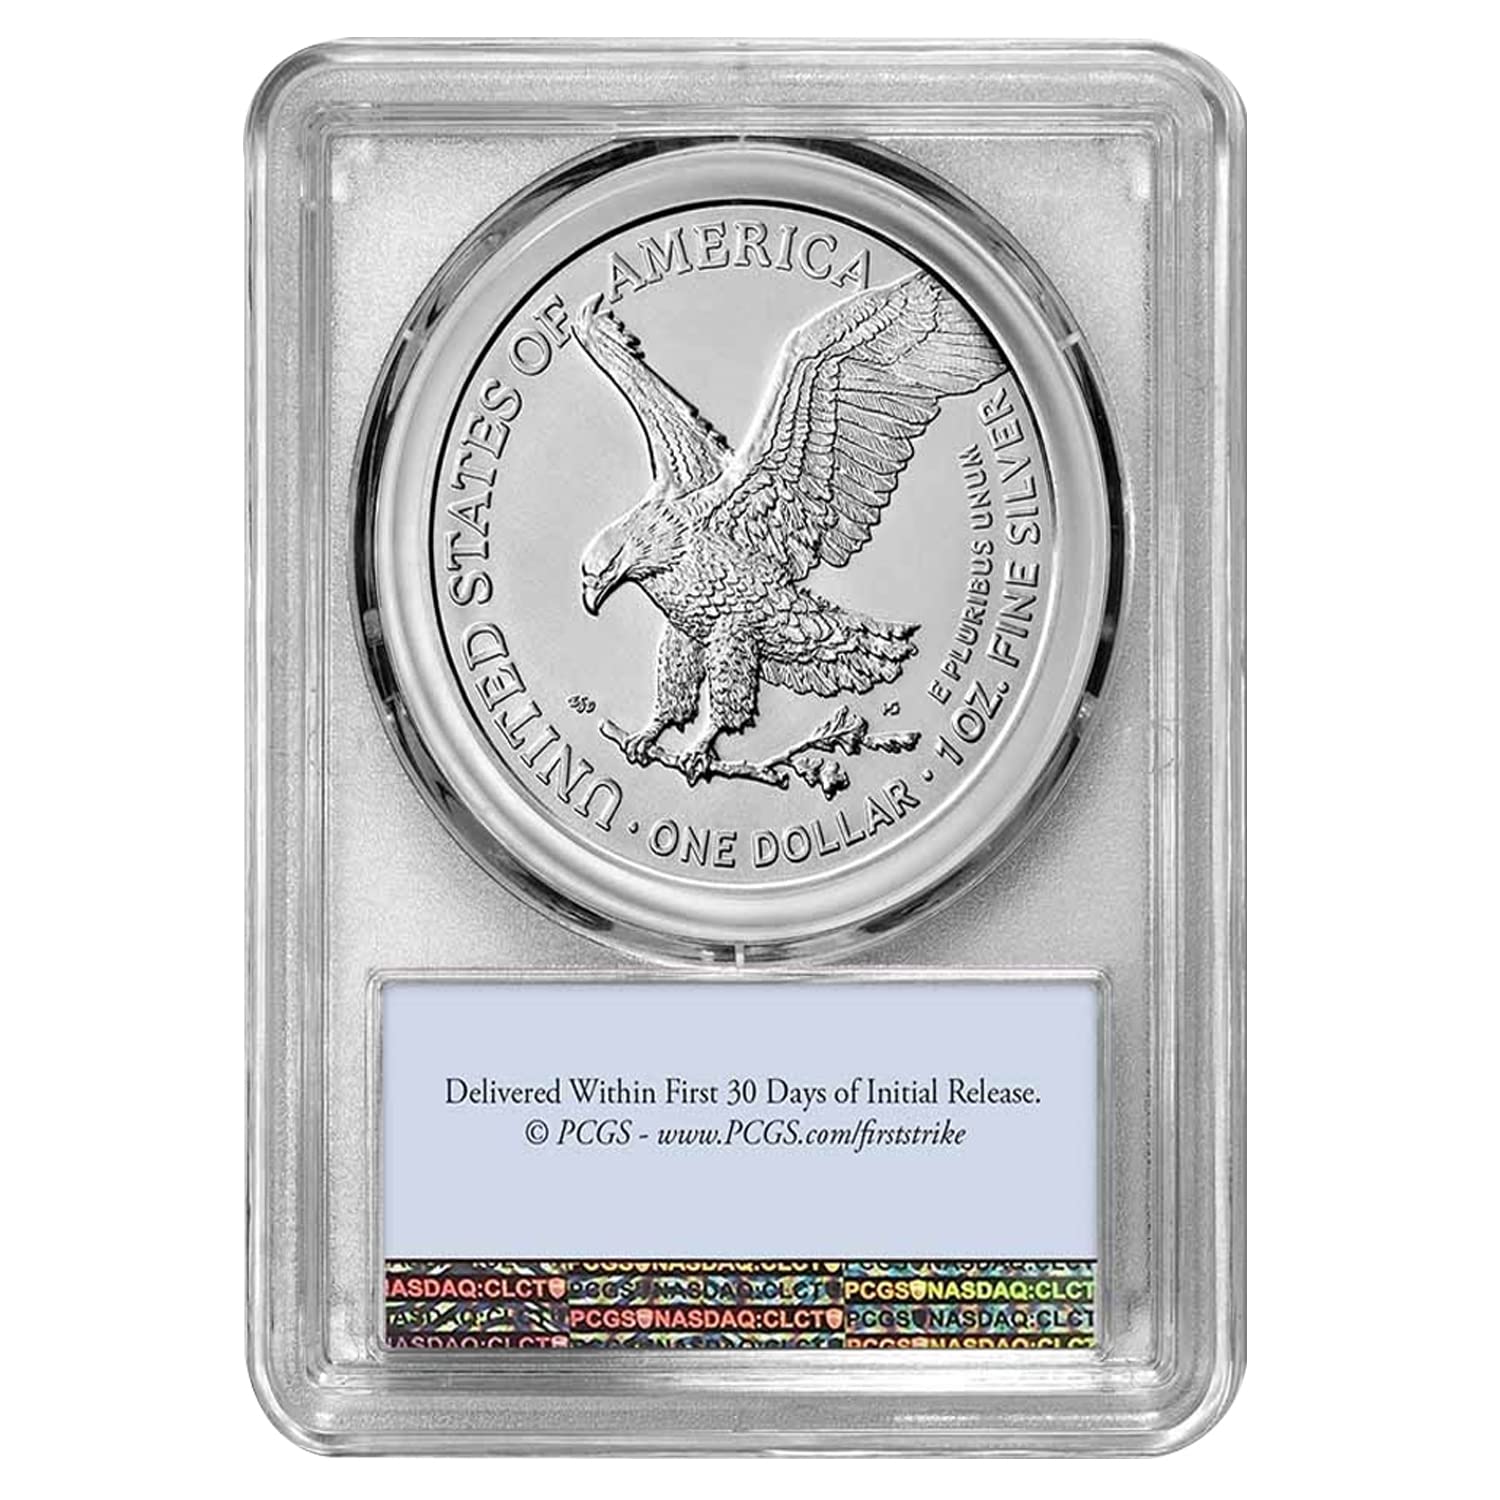 2021 American Silver Eagle - TYPE 2 - First Strike $1 MS-70 PCGS